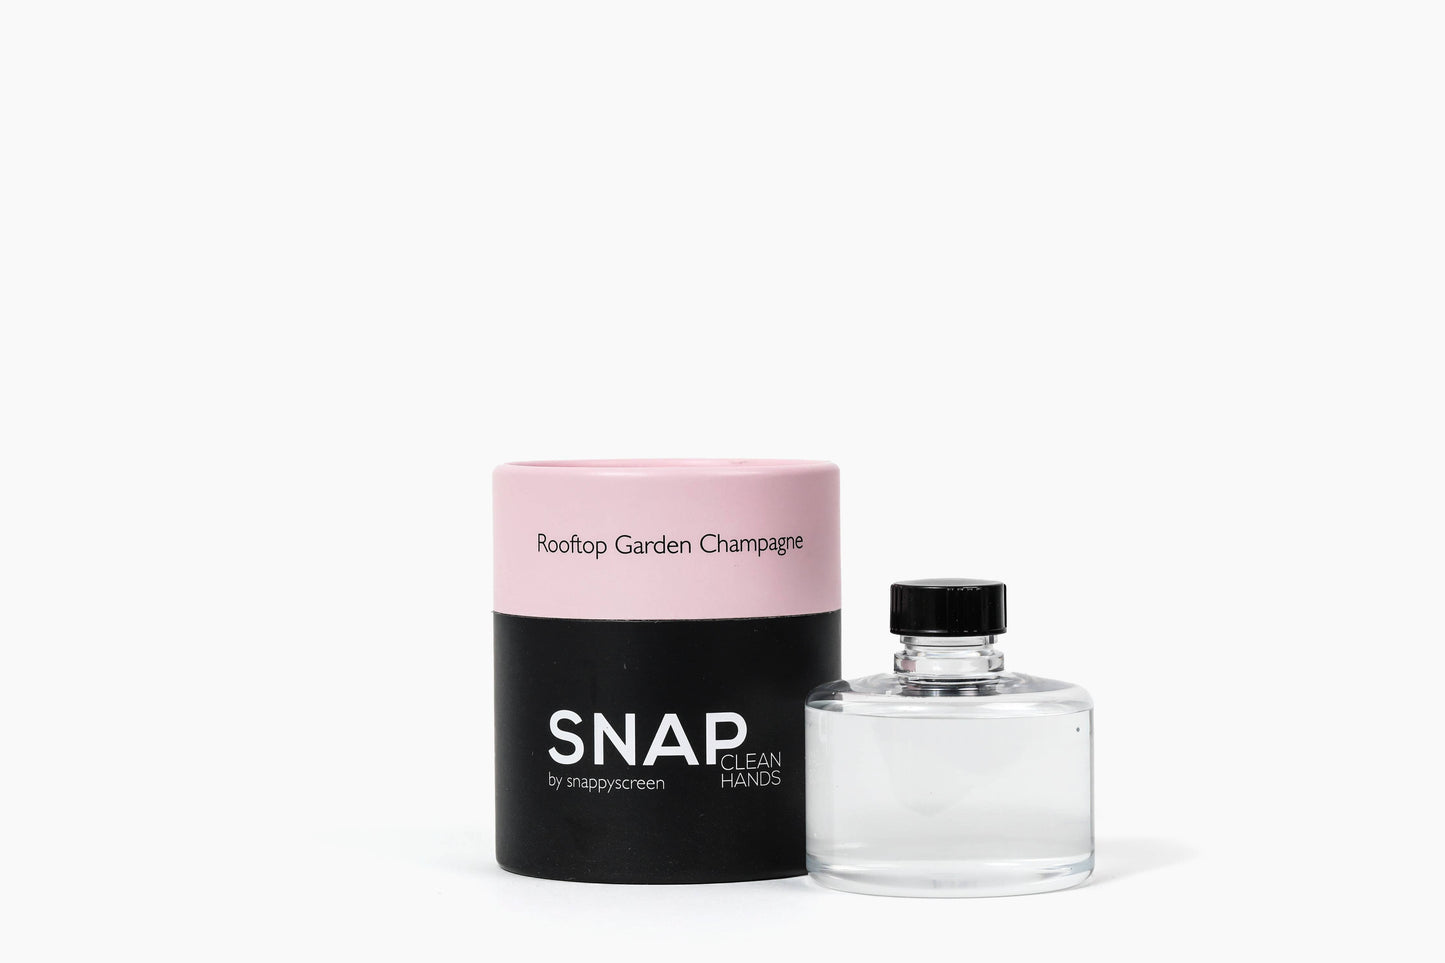 SNAP Wellness - Touchless Mist Sanitizer Refill (Rooftop Garden Champagne)